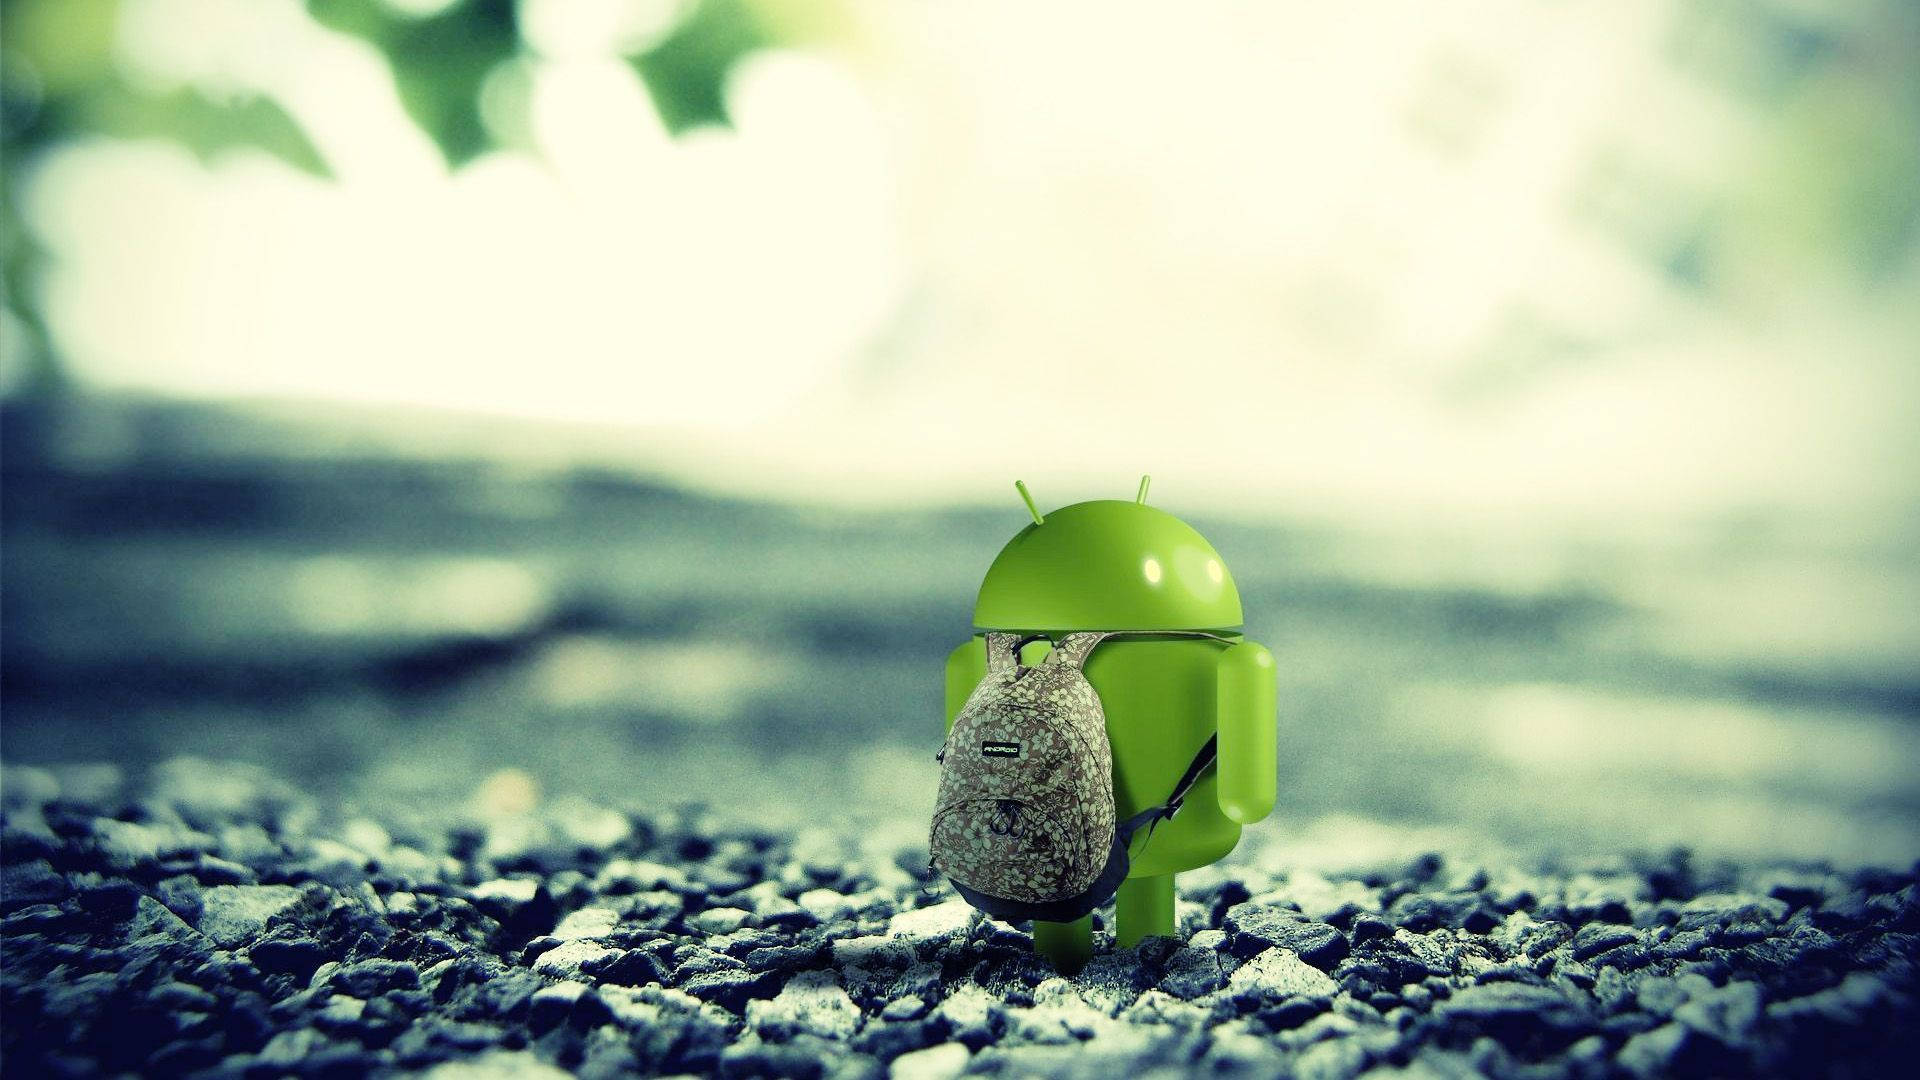 Cute Android Backpack Laptop Wallpaper